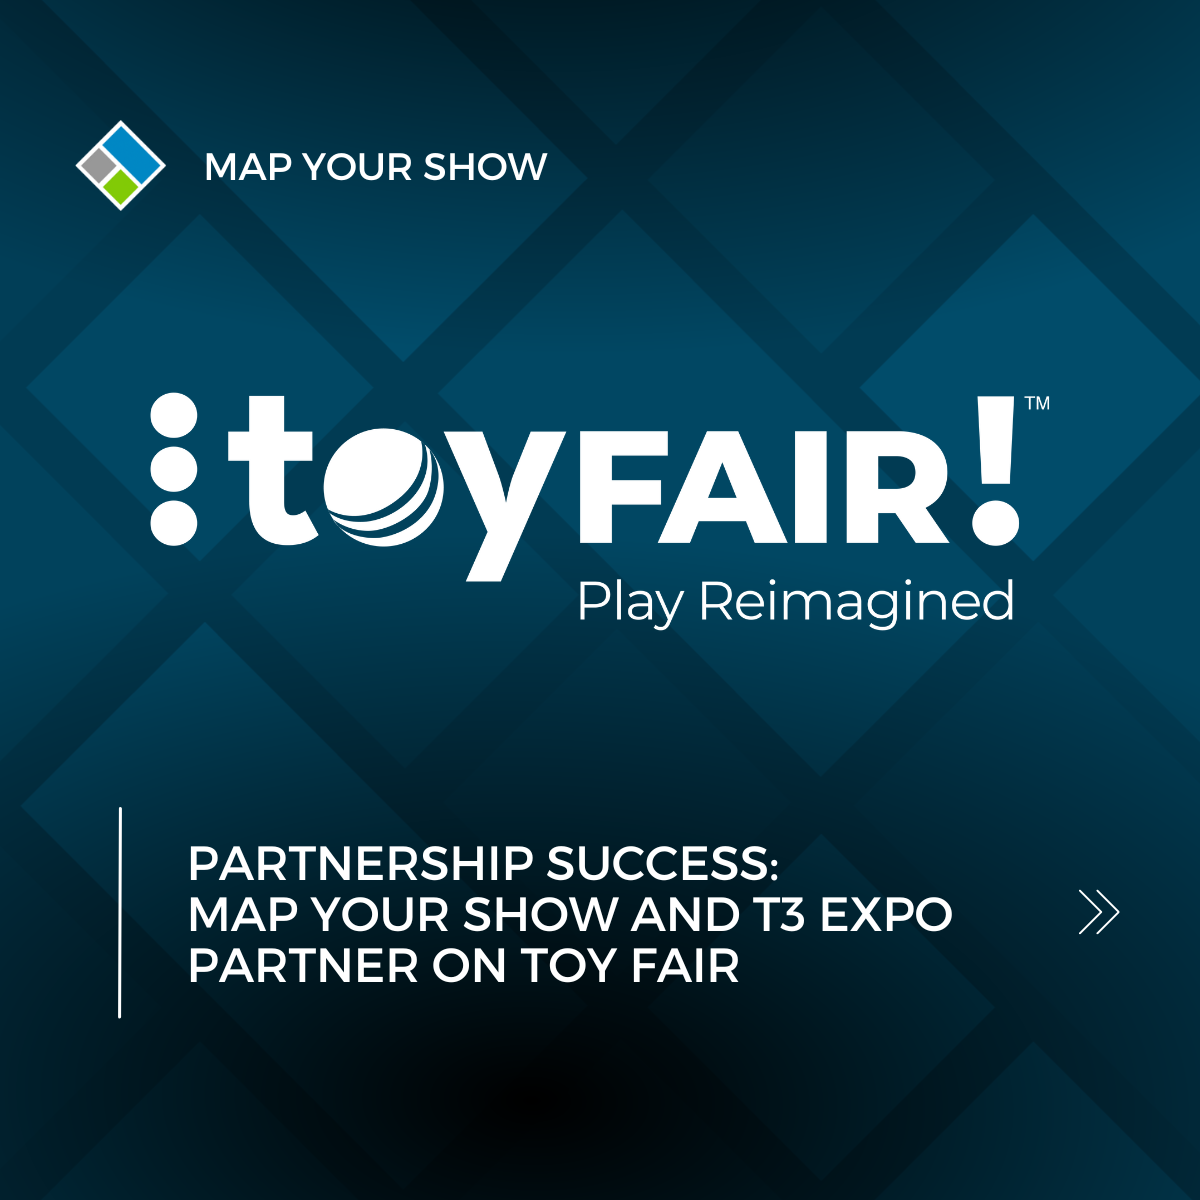 Toyfair and Map your Show 